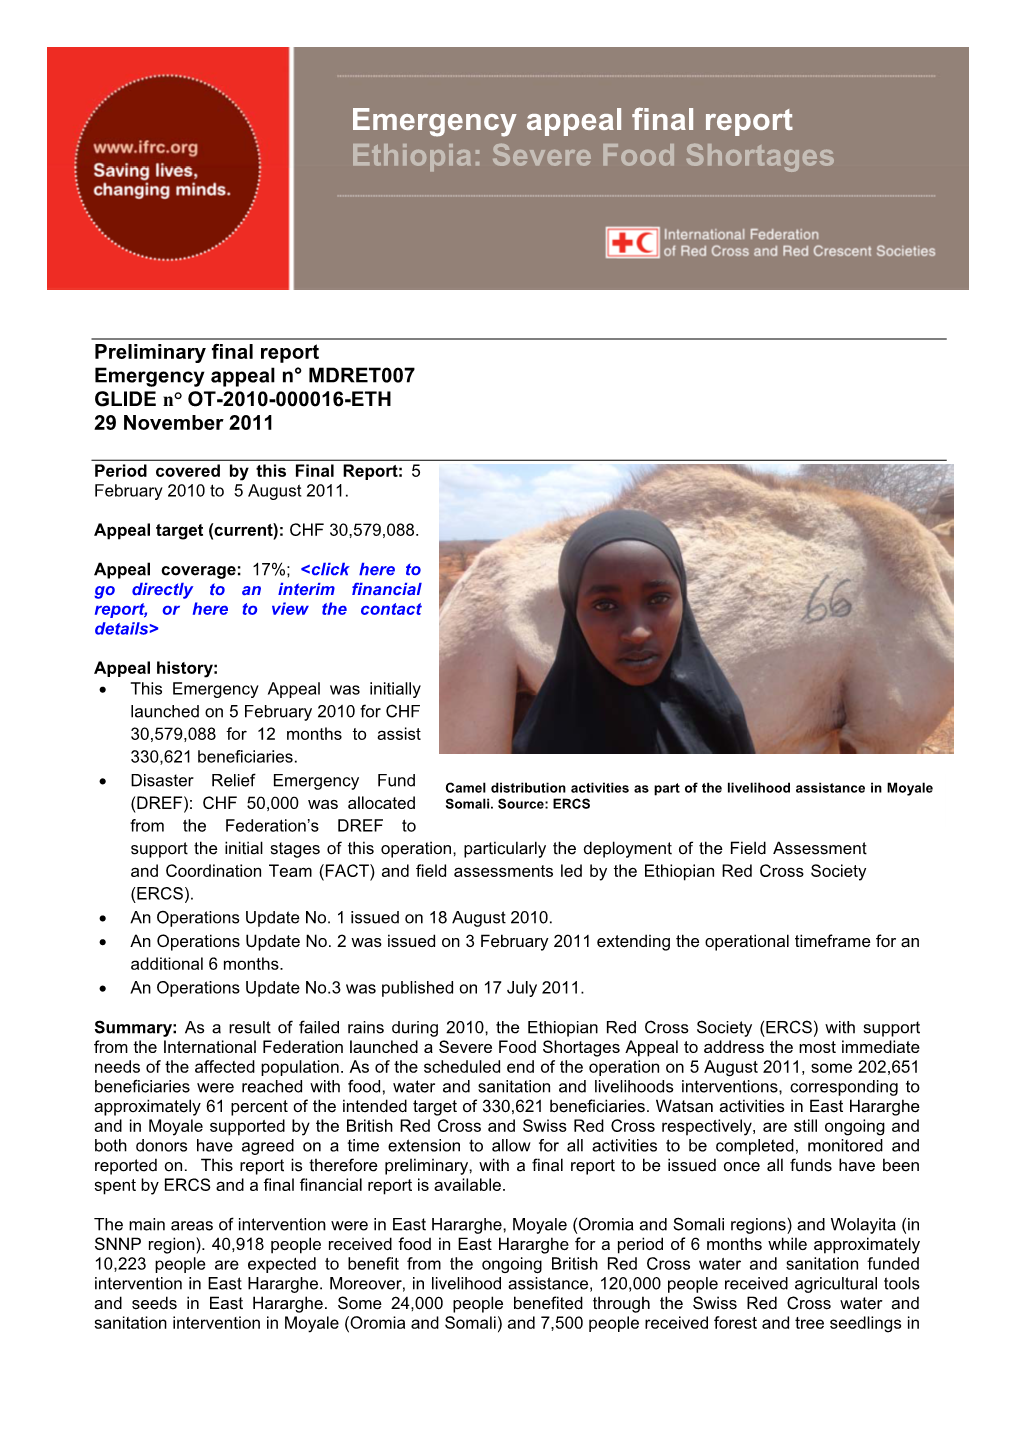 Emergency Appeal Final Report Ethiopia: Severe Food Shortages